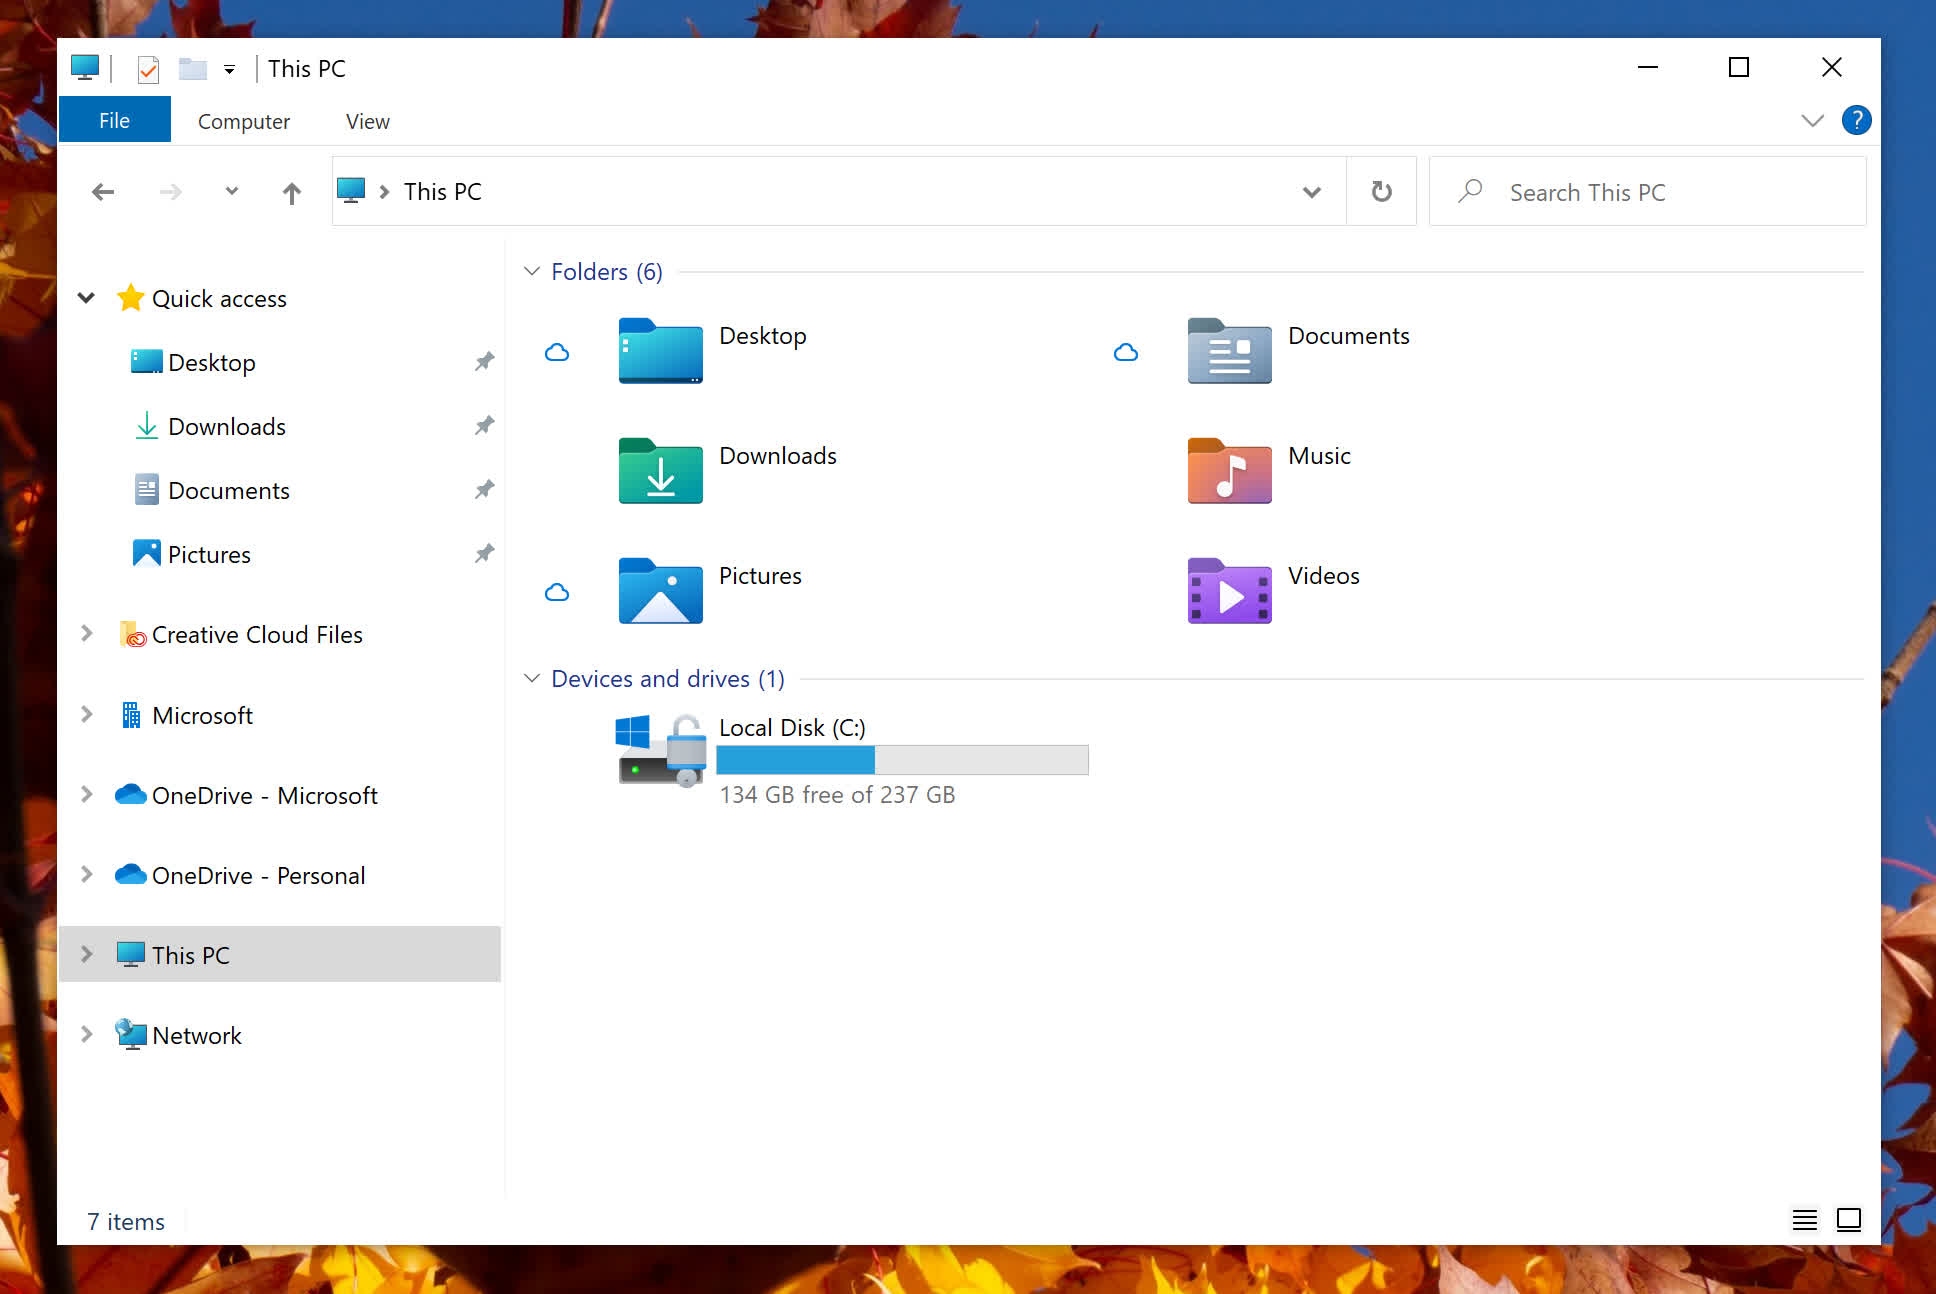 Windows 10 gets new icons for the File Explorer in latest Insider build